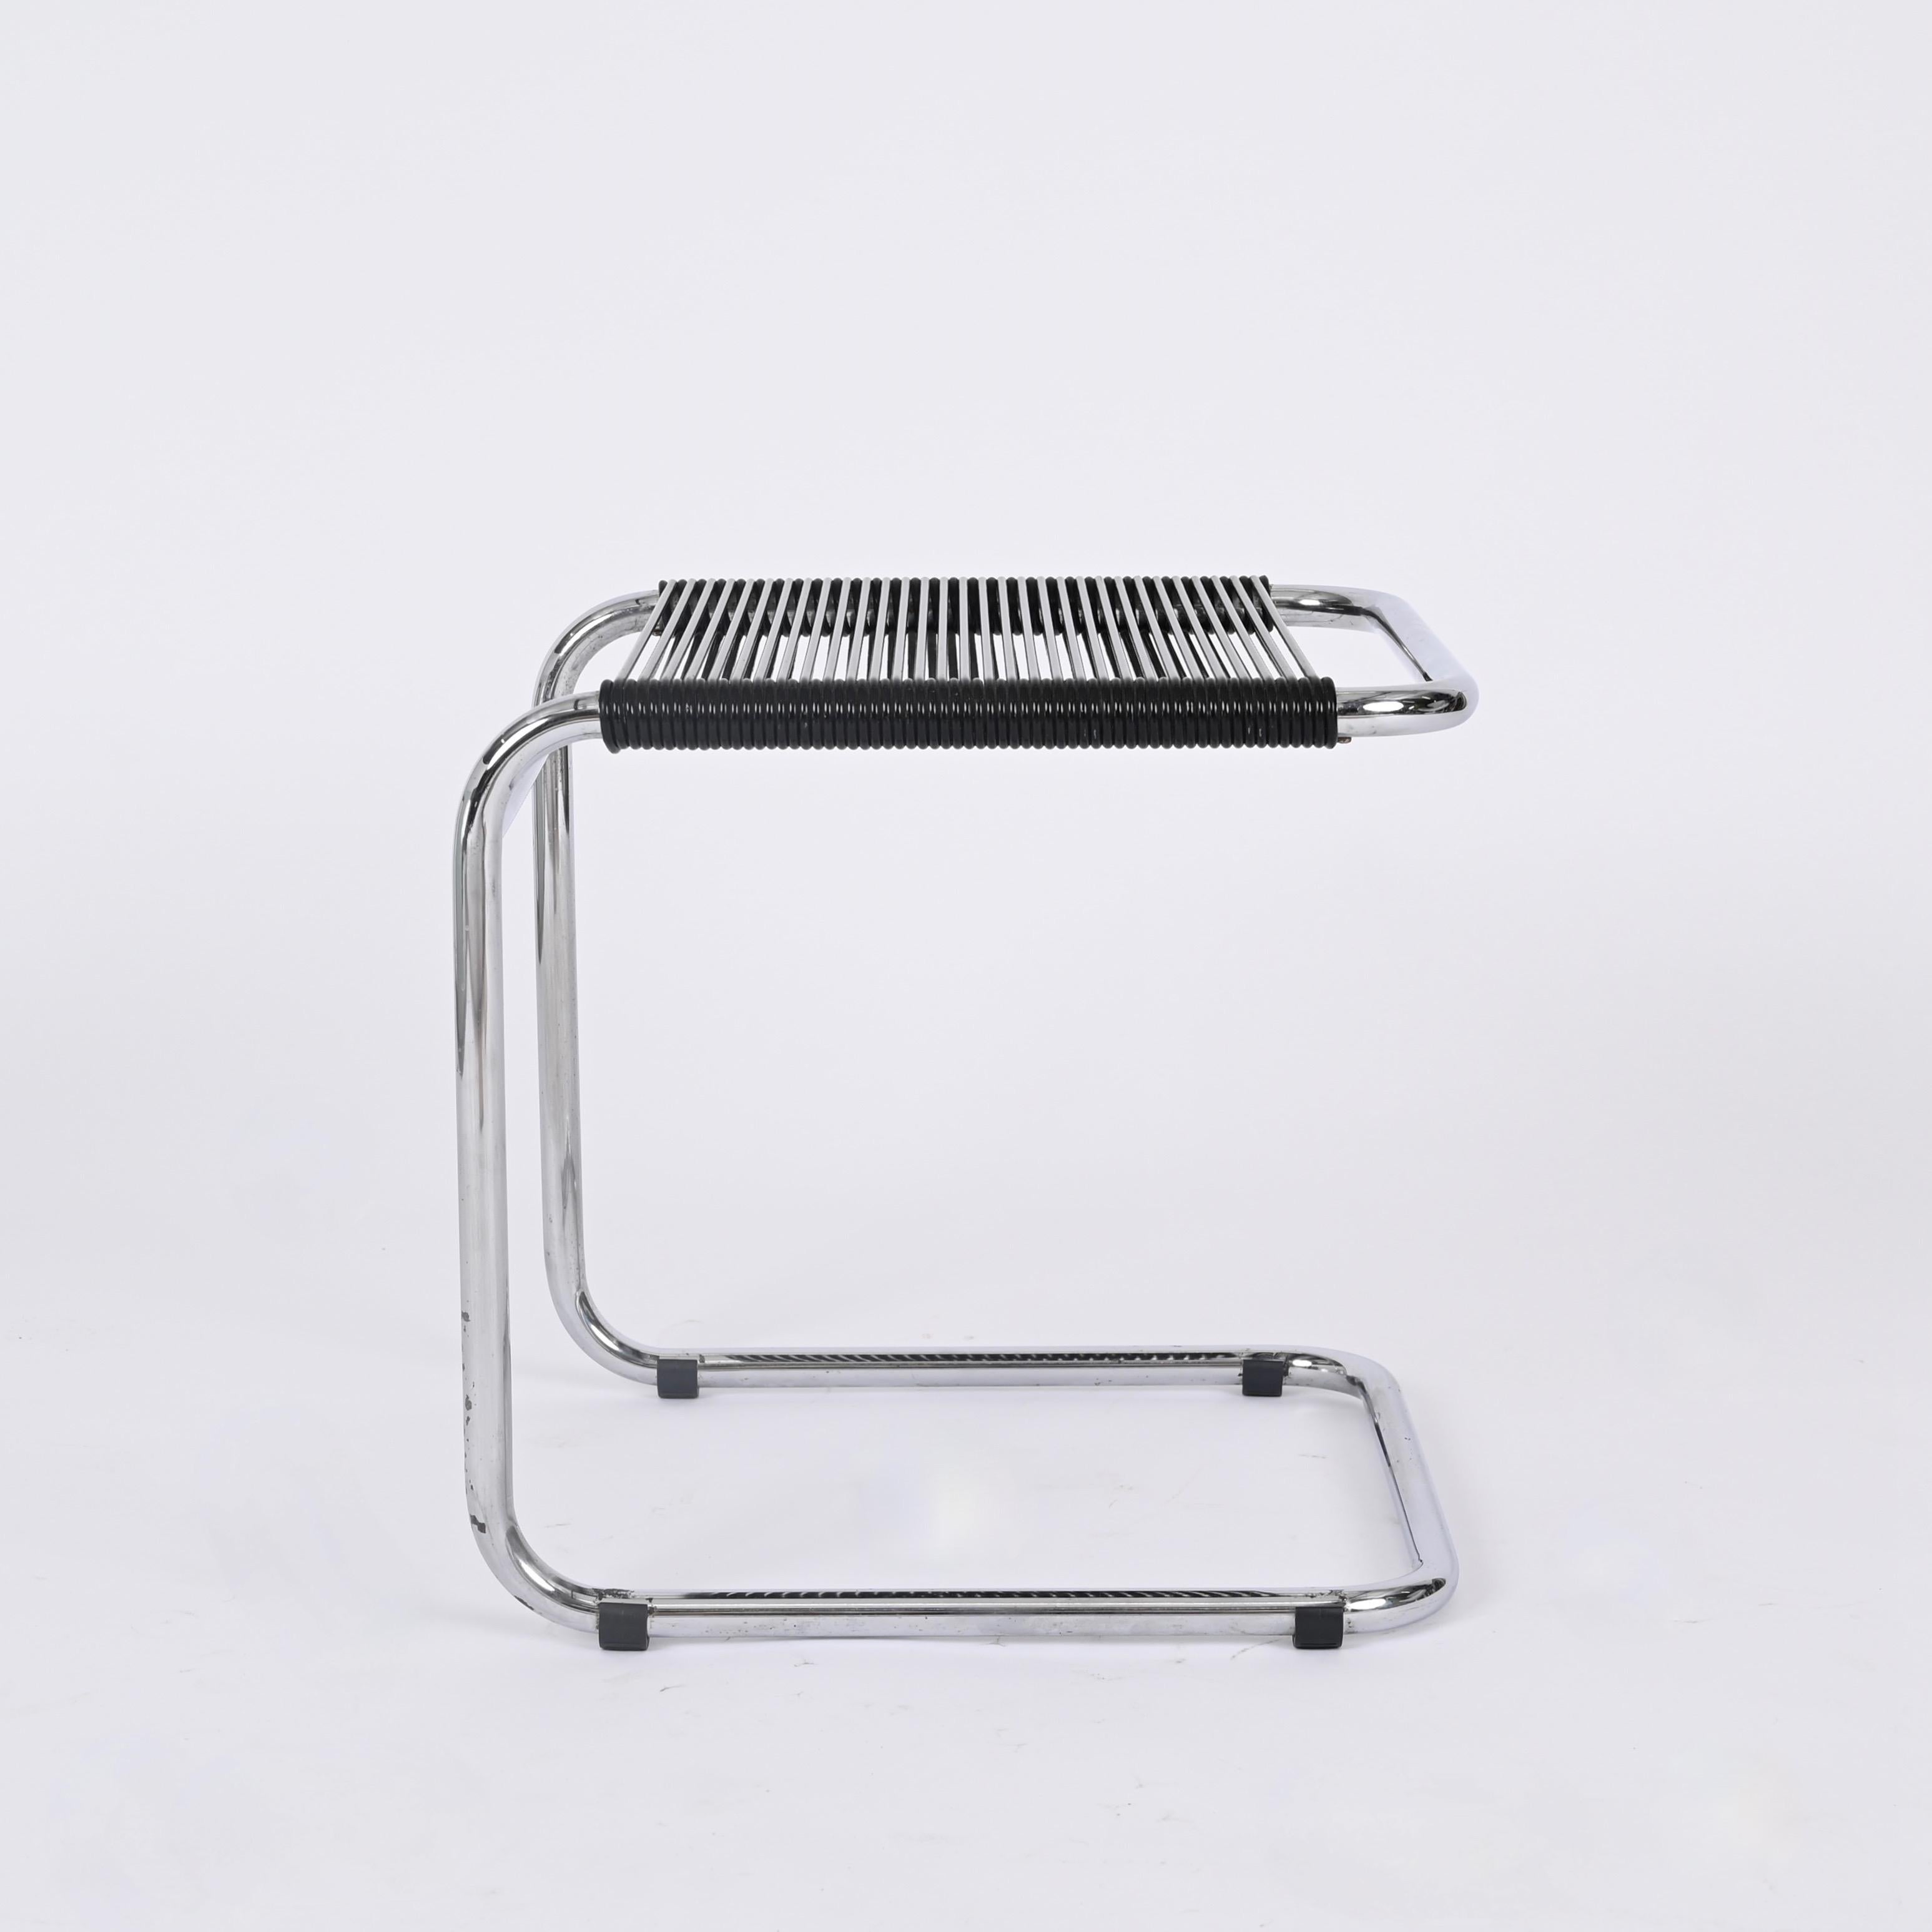 20th Century Andre Dupre Bauhaus Pouf Stool Chromed Steel and Black Rubber, Knoll 1950s For Sale